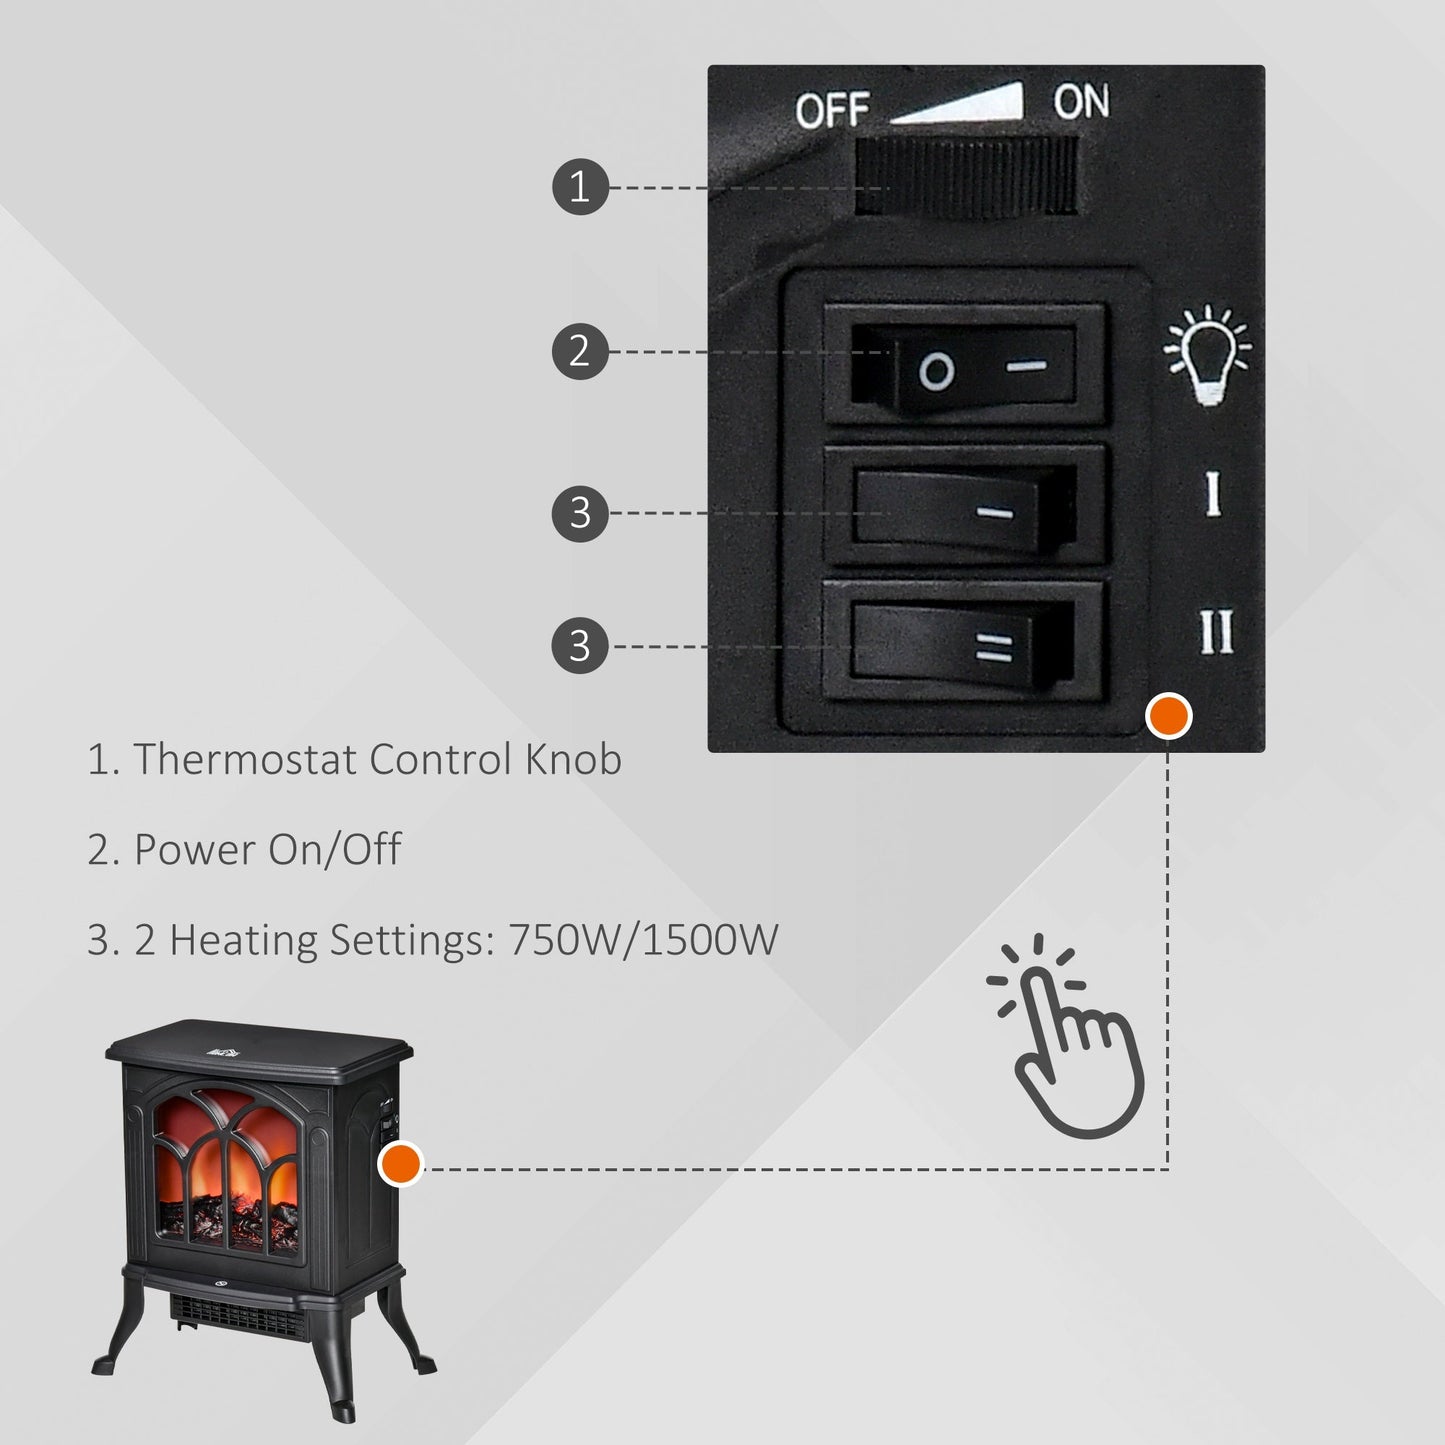 Miscellaneous-Free Standing Electric Fireplace, Fire Place Heater with Flame Effect, Adjustable Temperature & Overheat Protection, 750W/1500W, Black - Outdoor Style Company